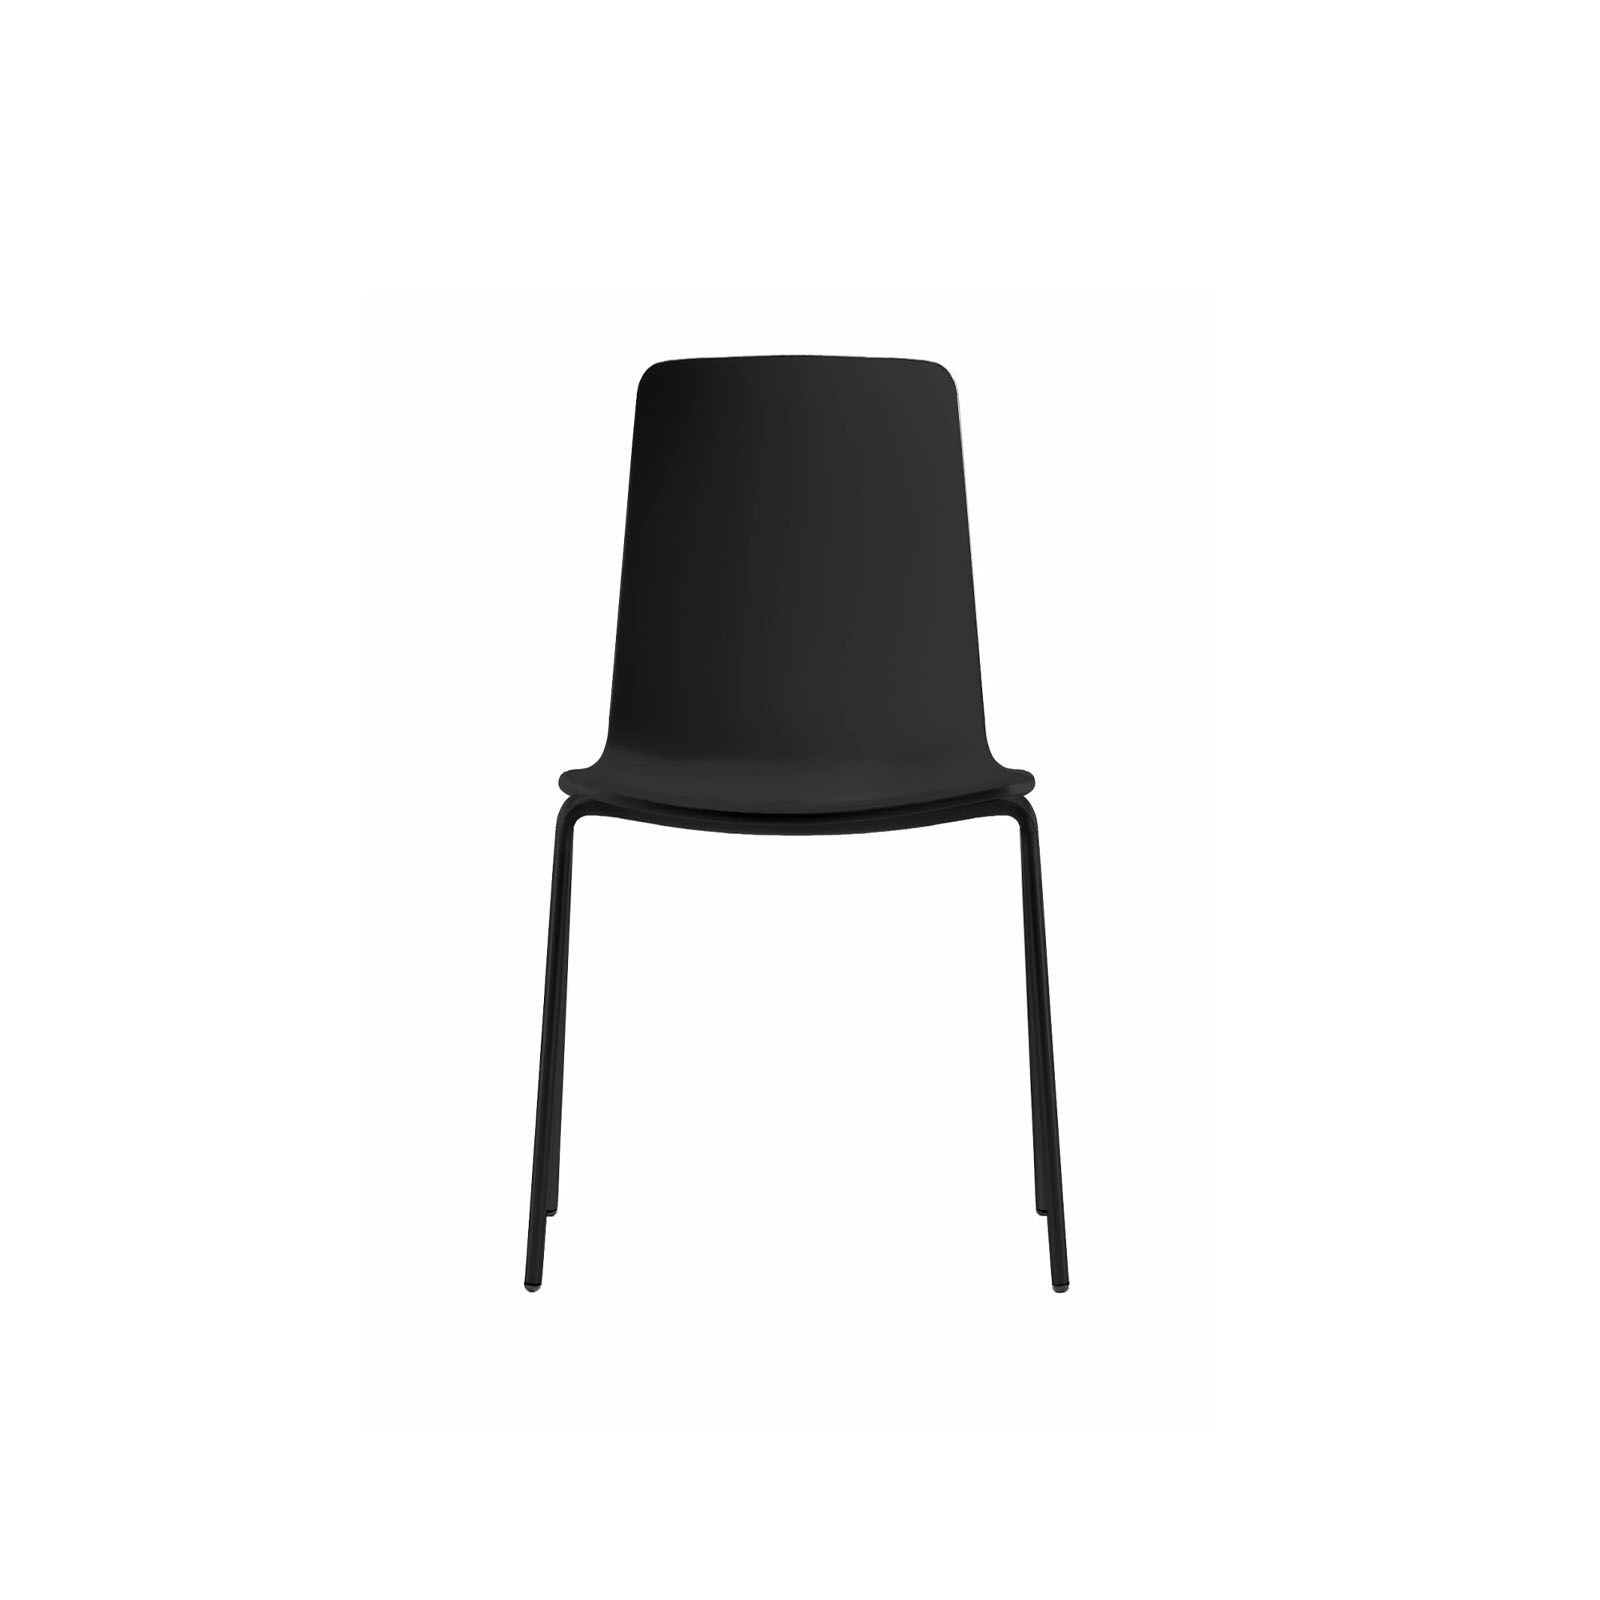 LOTTUS HIGH BACK CHAIR WITH 4-LEG BASE